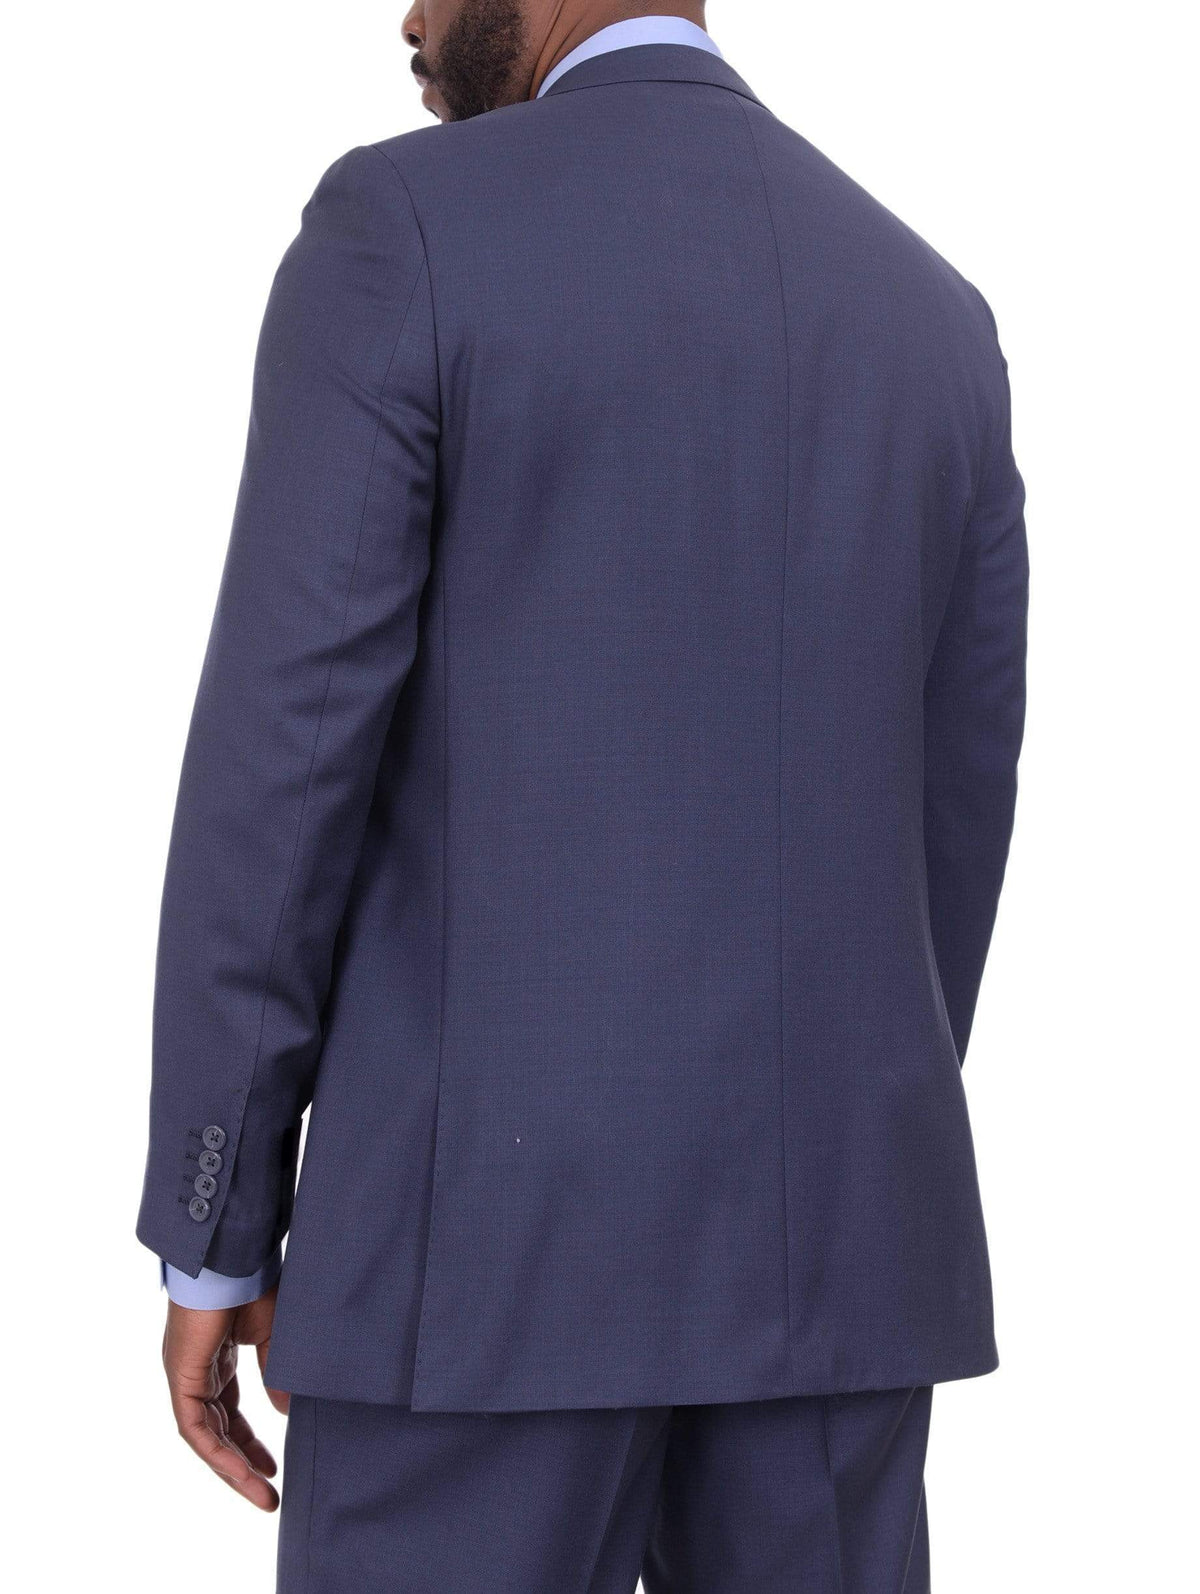 Giorgio Cosani TWO PIECE SUITS Giorgio Cosani Regular Fit Solid Blue Two Button Wool Cashmere Blend Suit